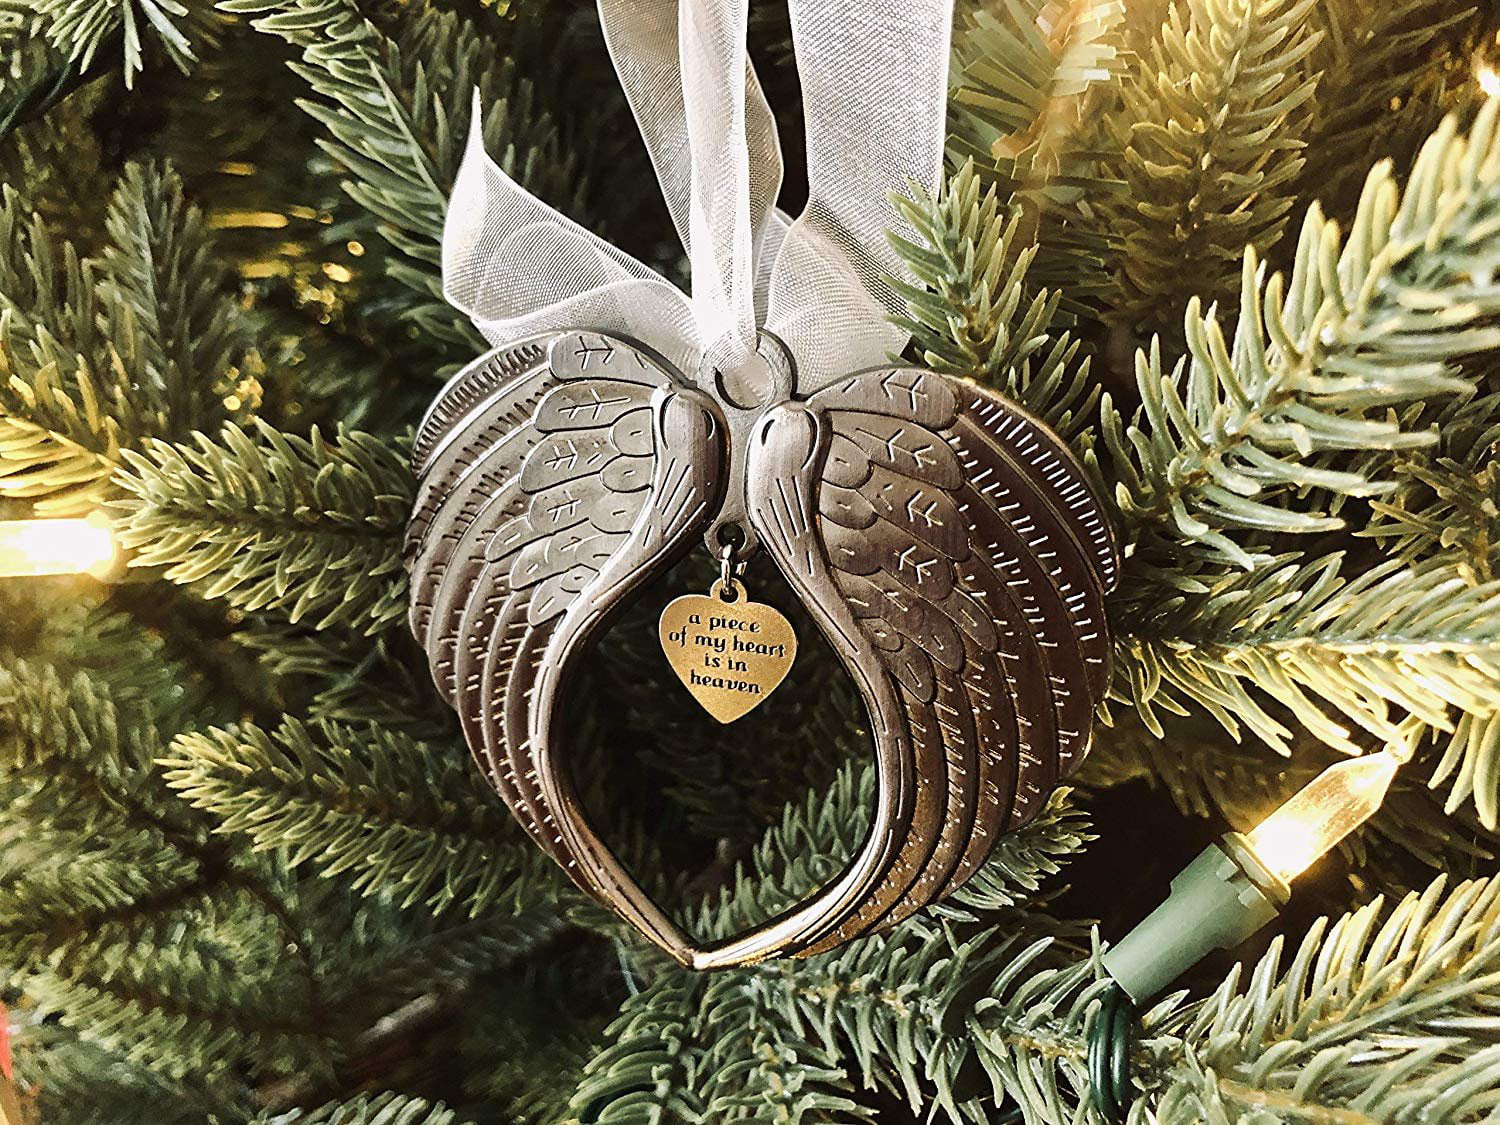 Christmas 2021 Remembrance Ornament Engraved ornament Cardinal Ornament Christmas Tree Loss of loved one Memorial Ornament